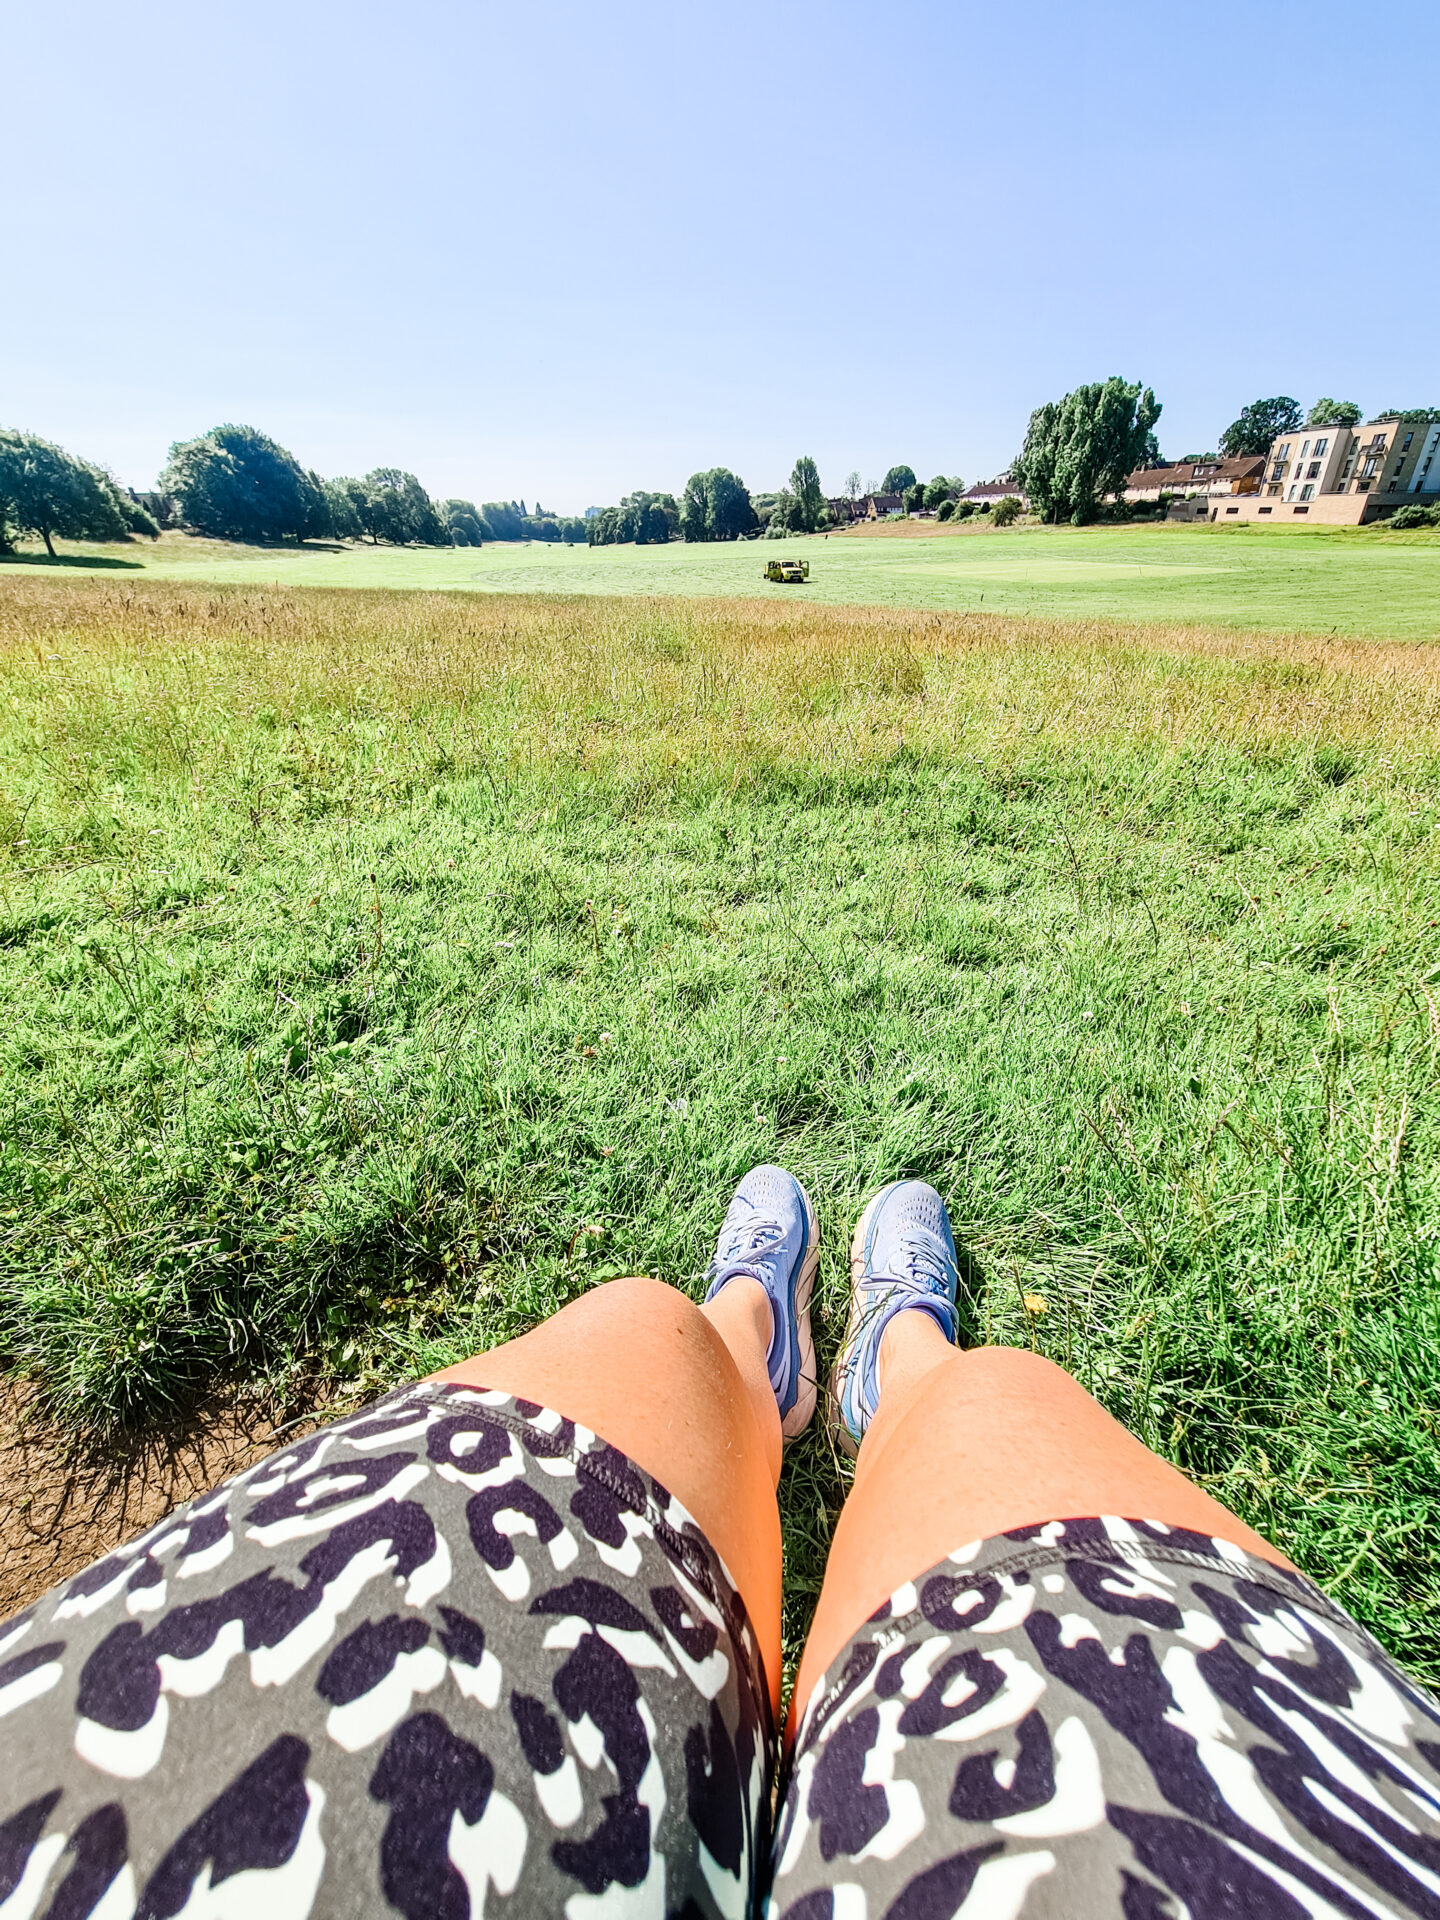 View of legs wearing shorts and running shoes